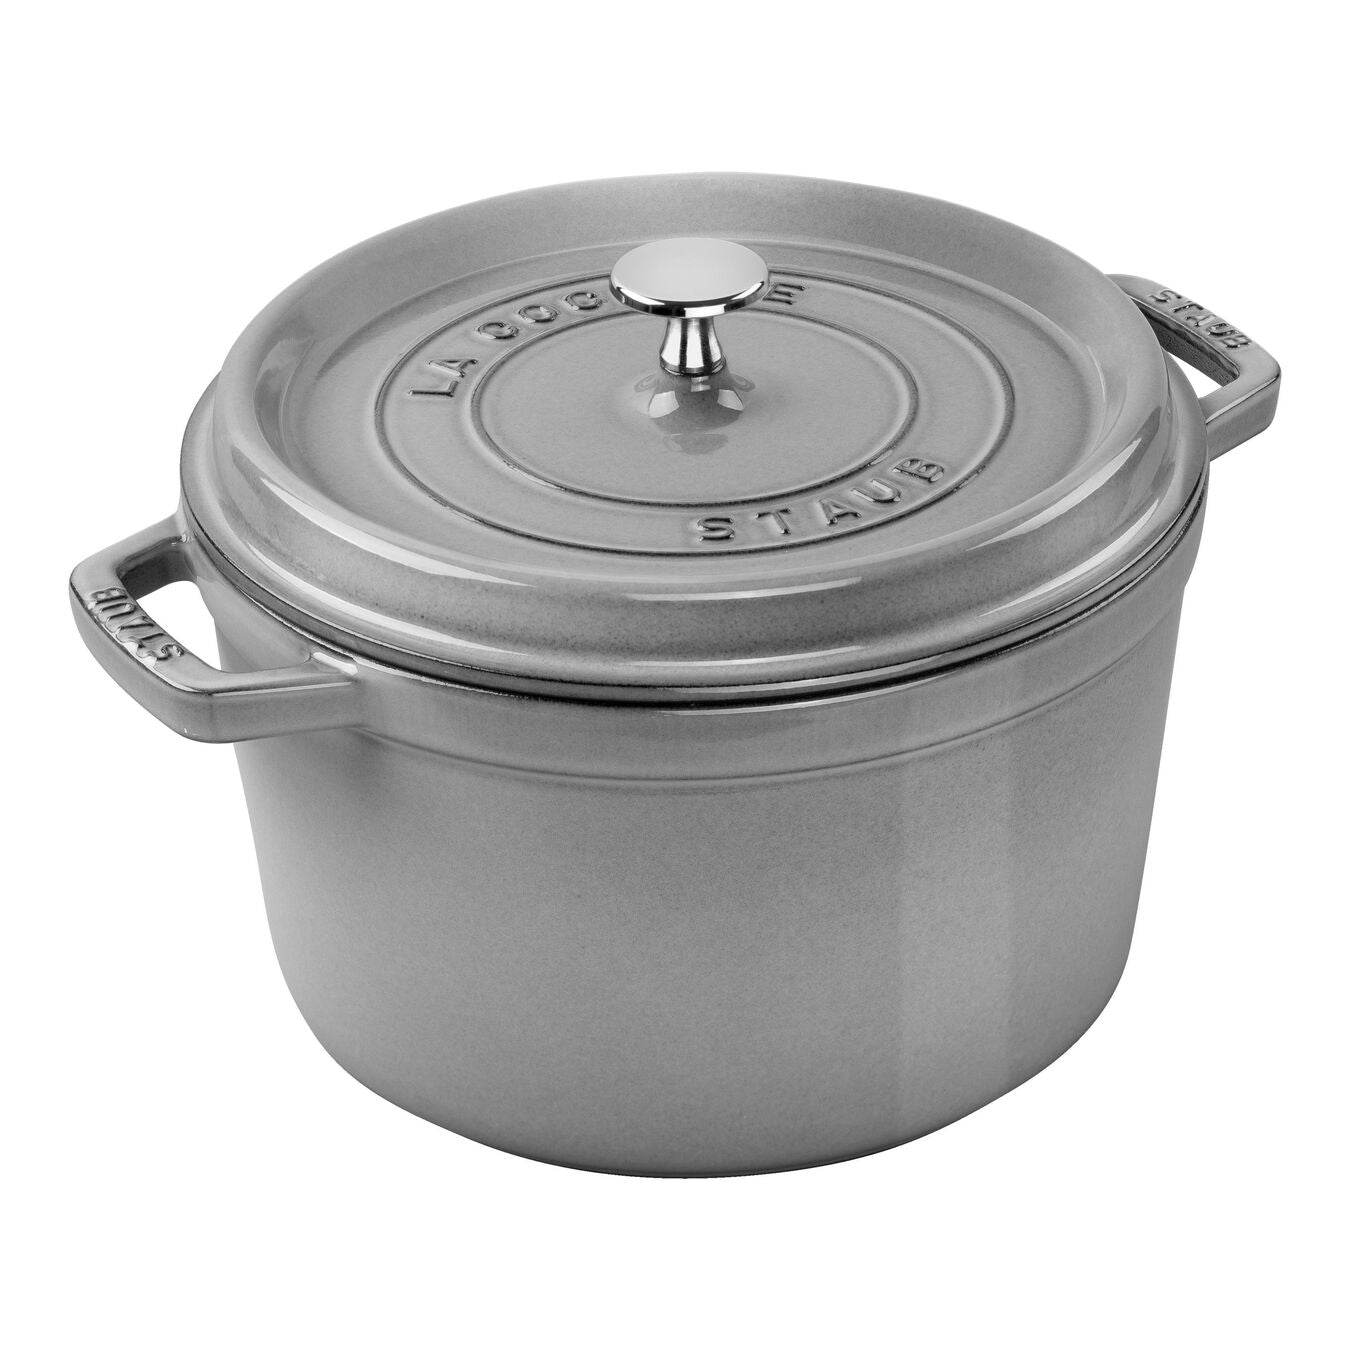 Alpine Cuisine 2 Quart Stainless Steel Dutch Oven Pot with Glass Lid, Silver